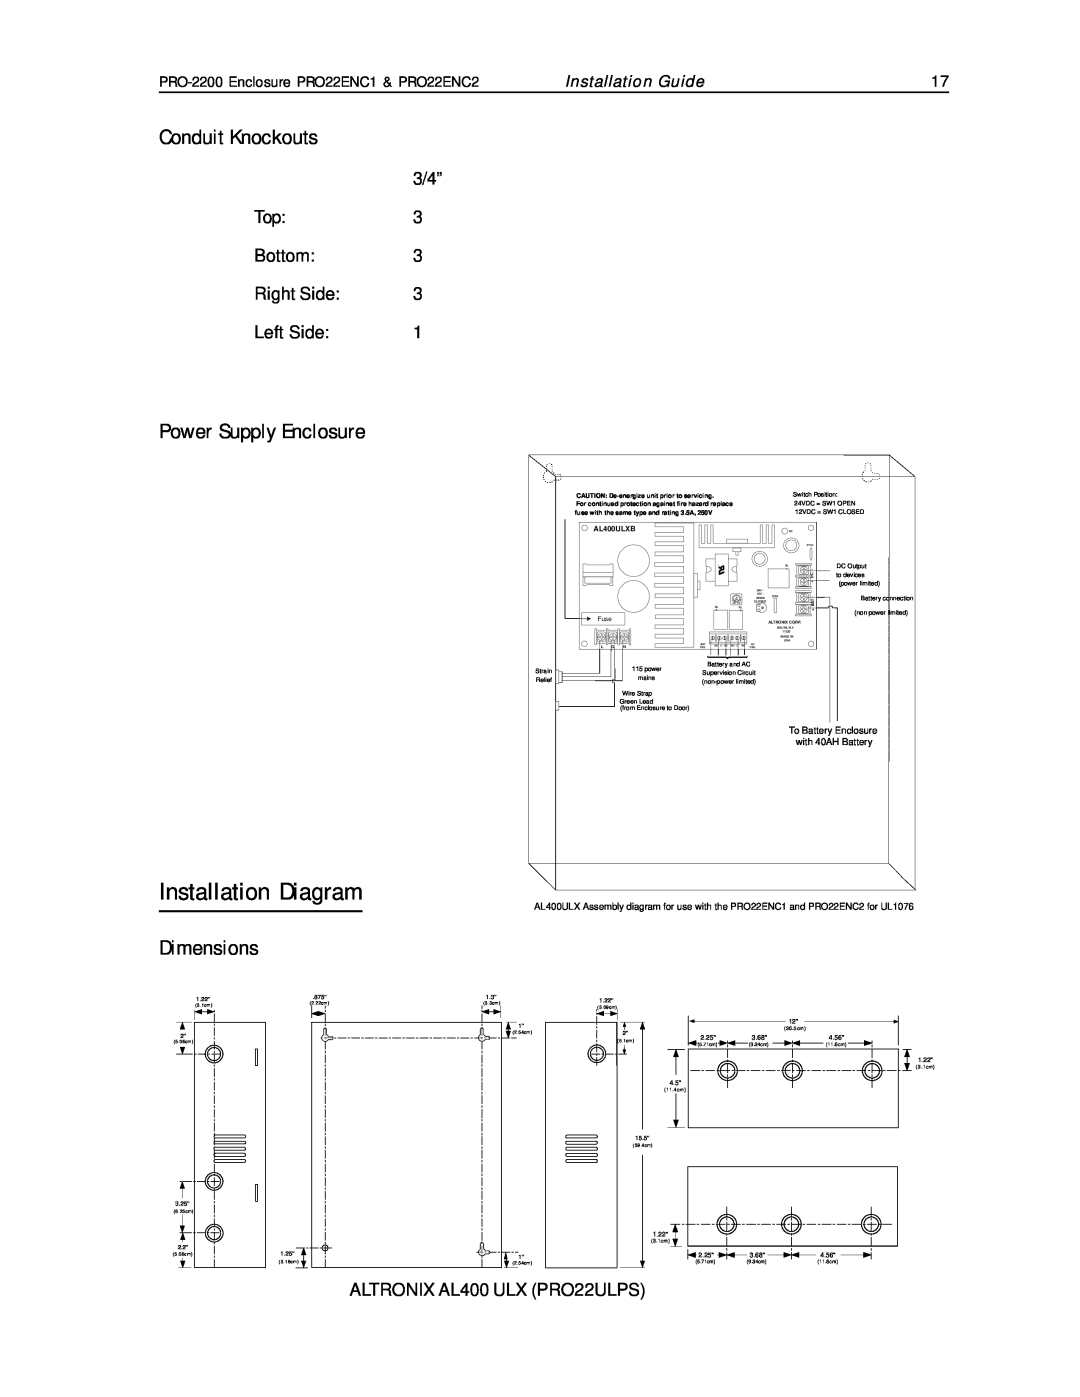 Honeywell PRO22ENC1 Installation Diagram, Power Supply Enclosure, Conduit Knockouts, Dimensions, Installation Guide, 3/4” 